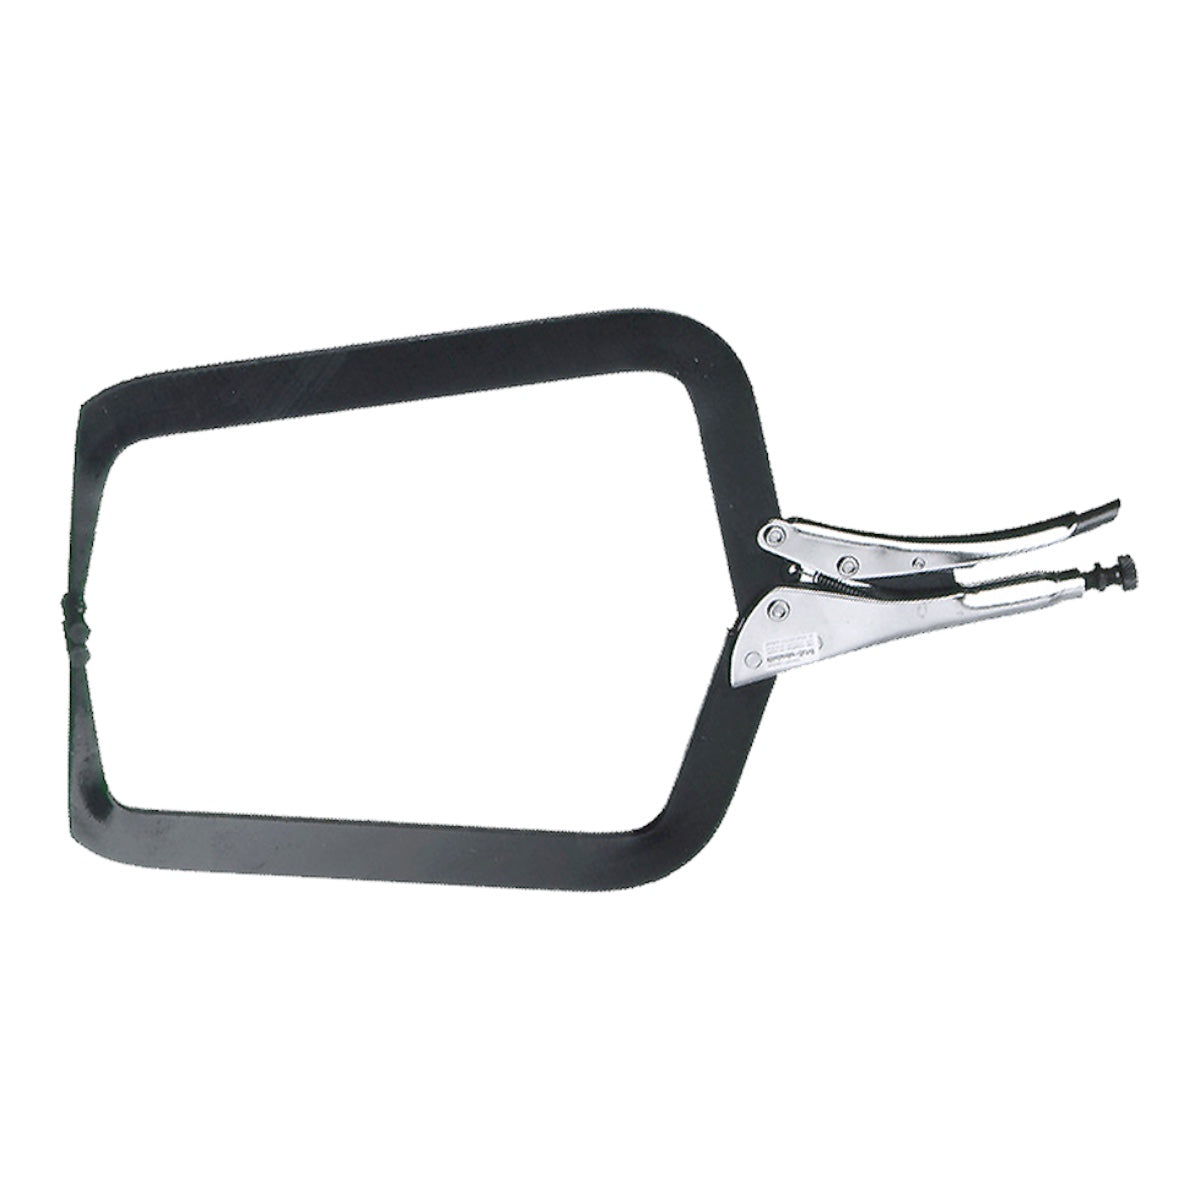 Clamping pliers No. 2 – length 30cm